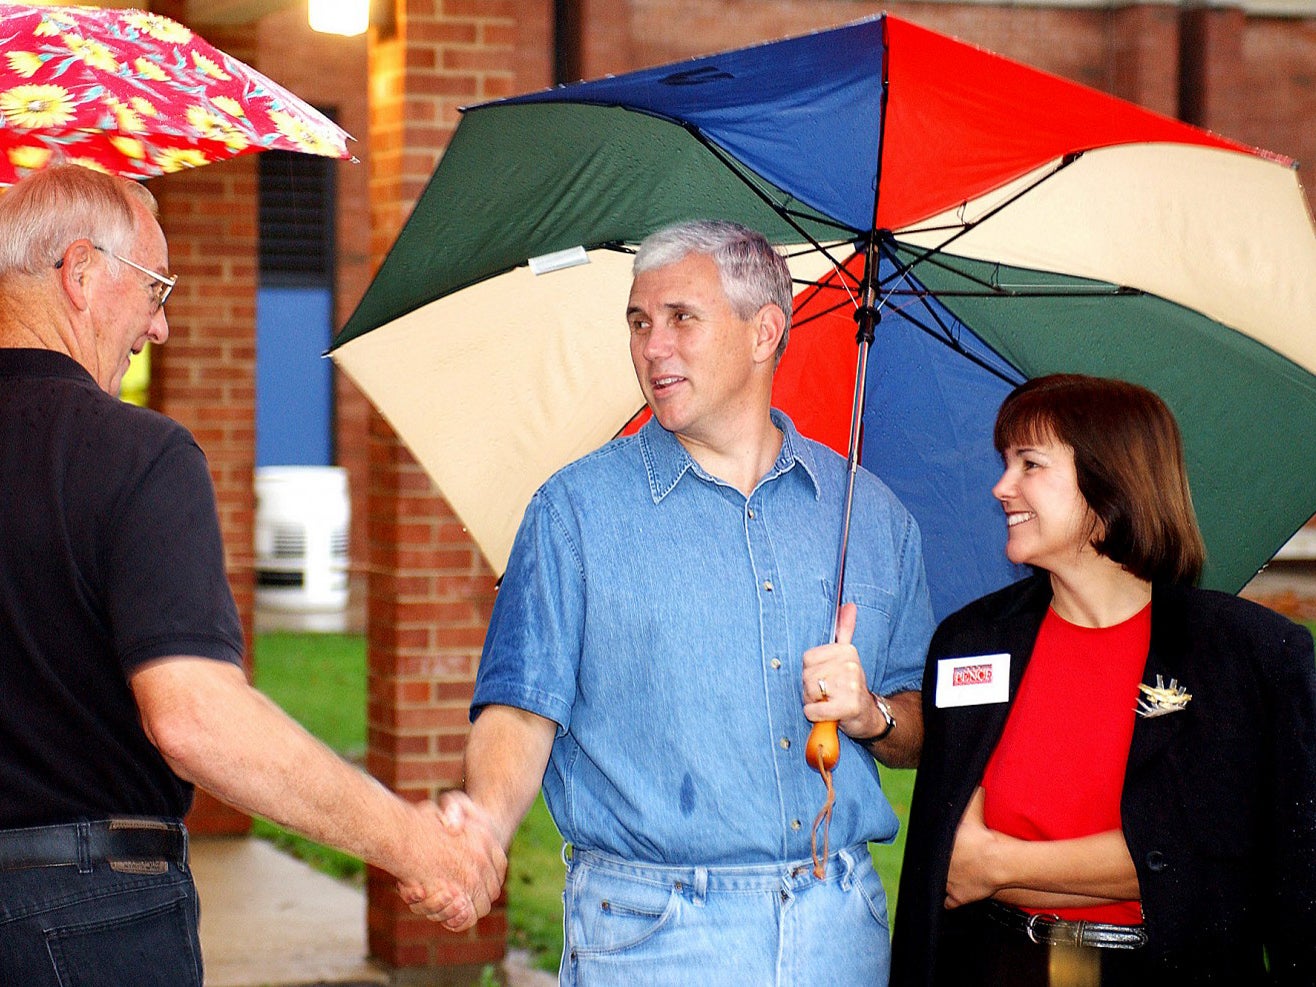 Mike Pence, centre, and Karen Pence campaign at Parkside Elementary School in Columbus, Indiana, in 2004